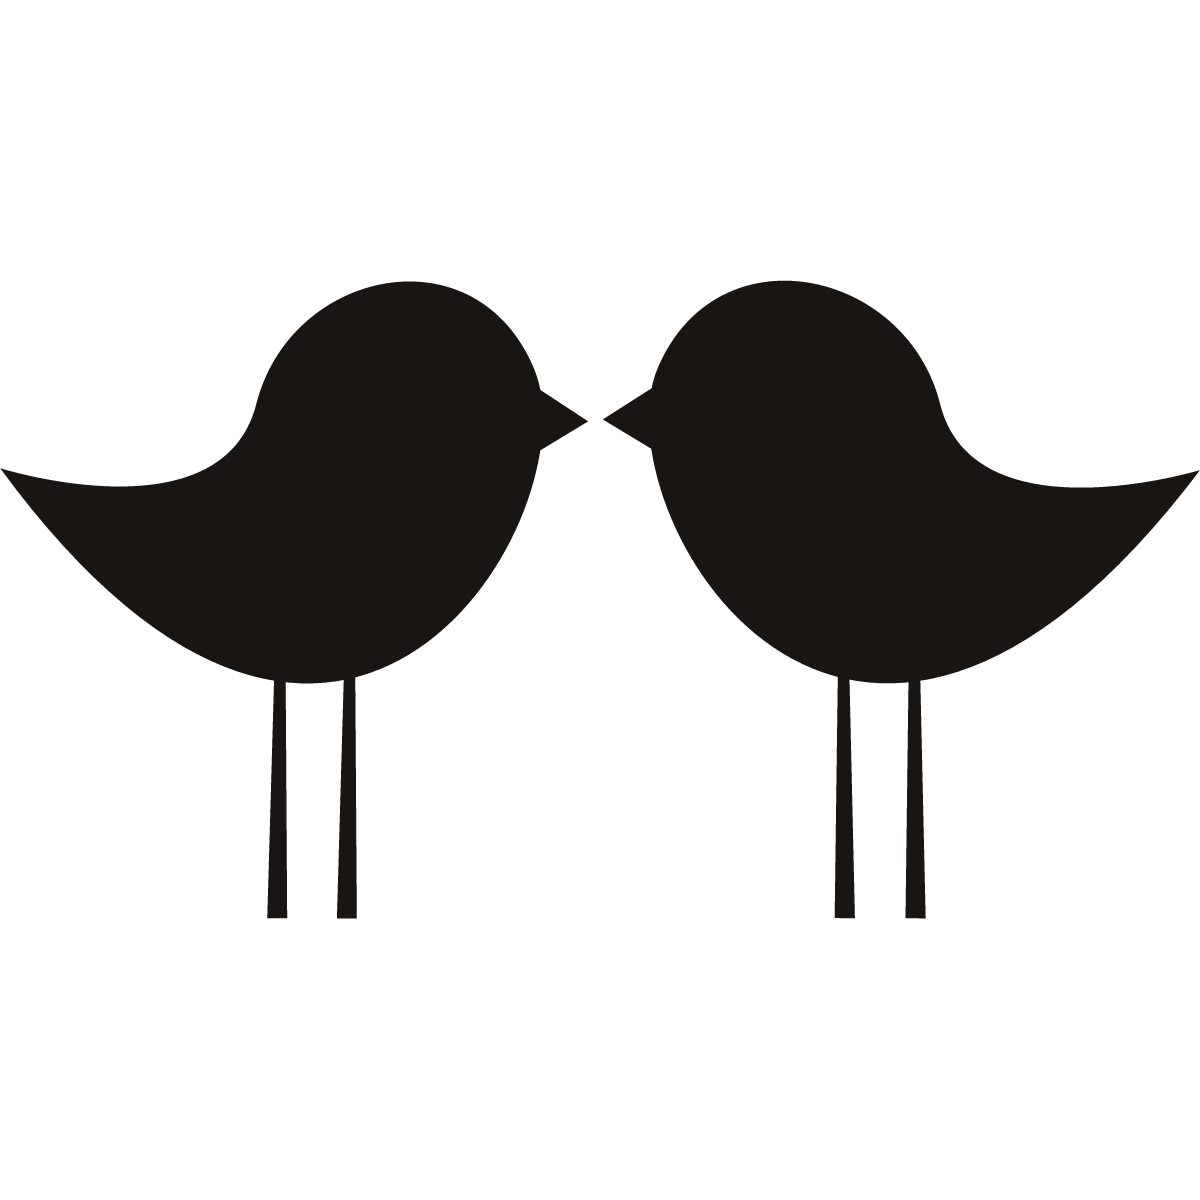 Love Birds Clipart | Free download on ClipArtMag
